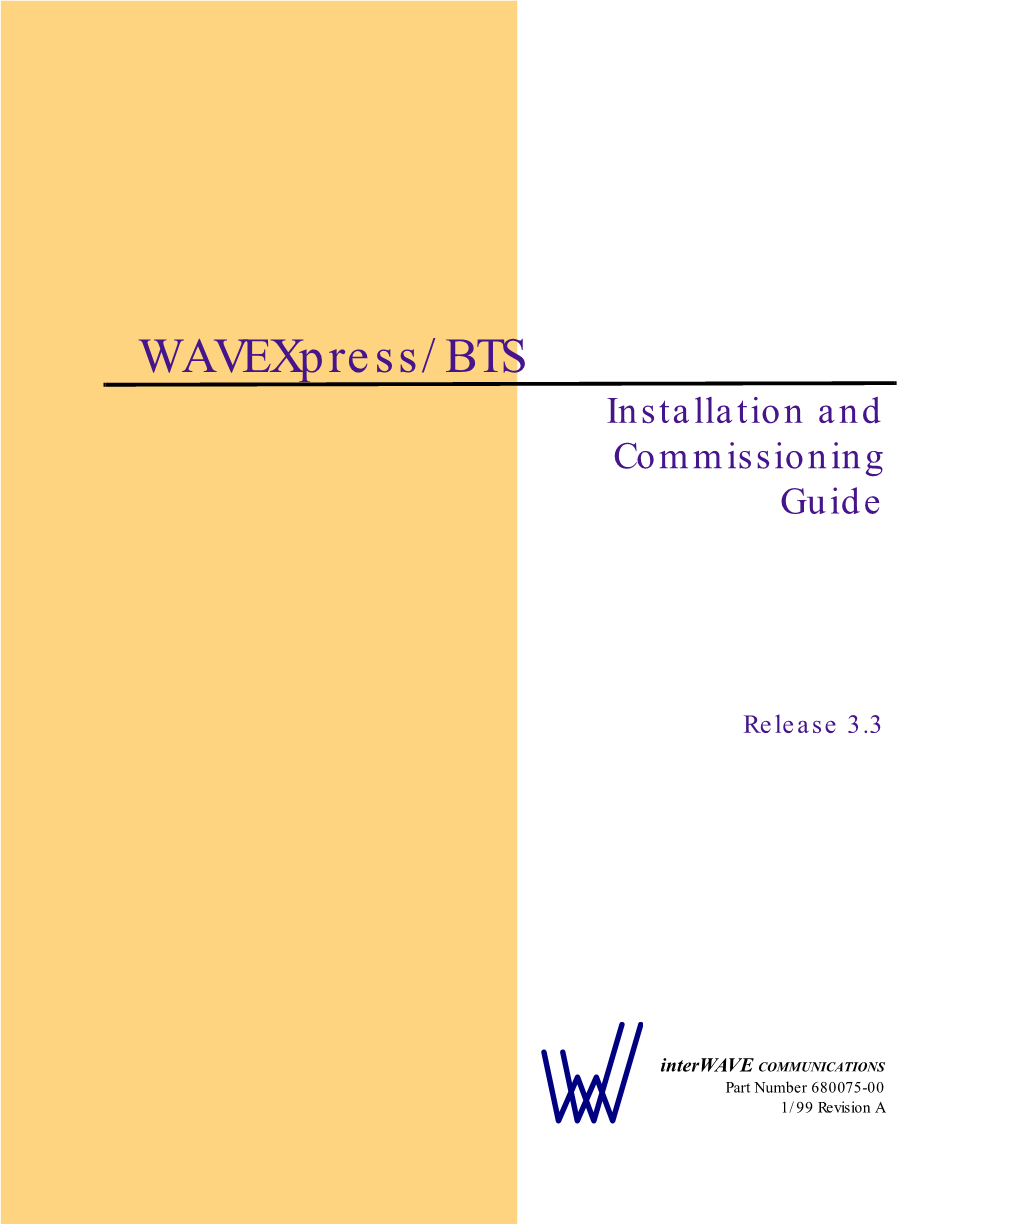 Wavexpress/BTS Installation and Commissioning Guide